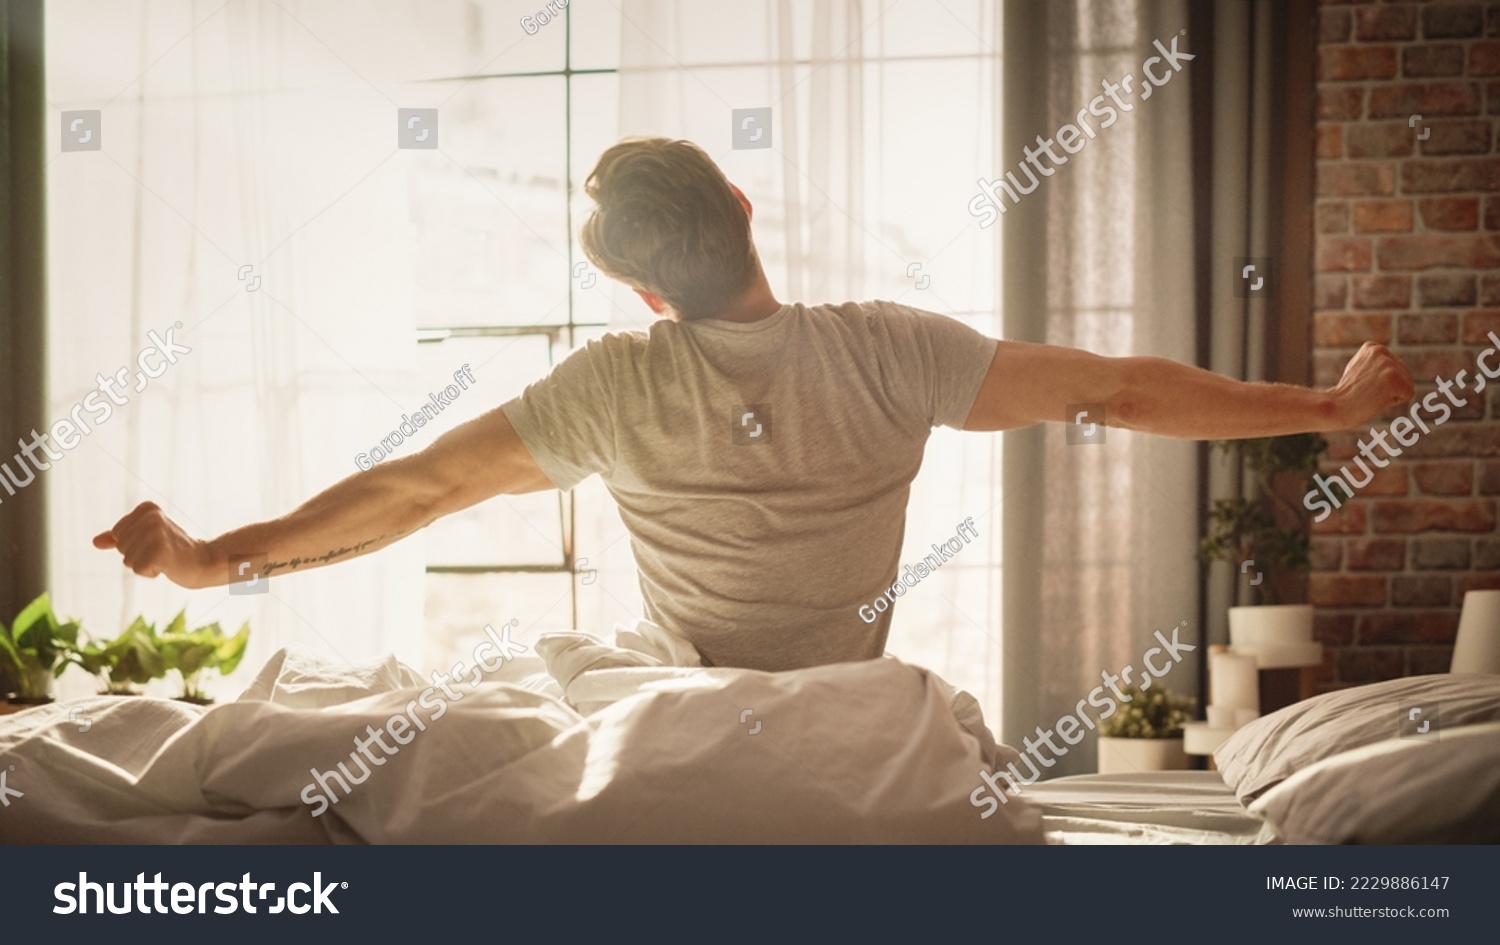 Handsome Young Man Waking up in the Morning, Stretches and Gets Out of Bed, Sun Shines From the Apartment Window in Bedroom, He is Ready for Business Opportunities, Achievements, Adventures #2229886147